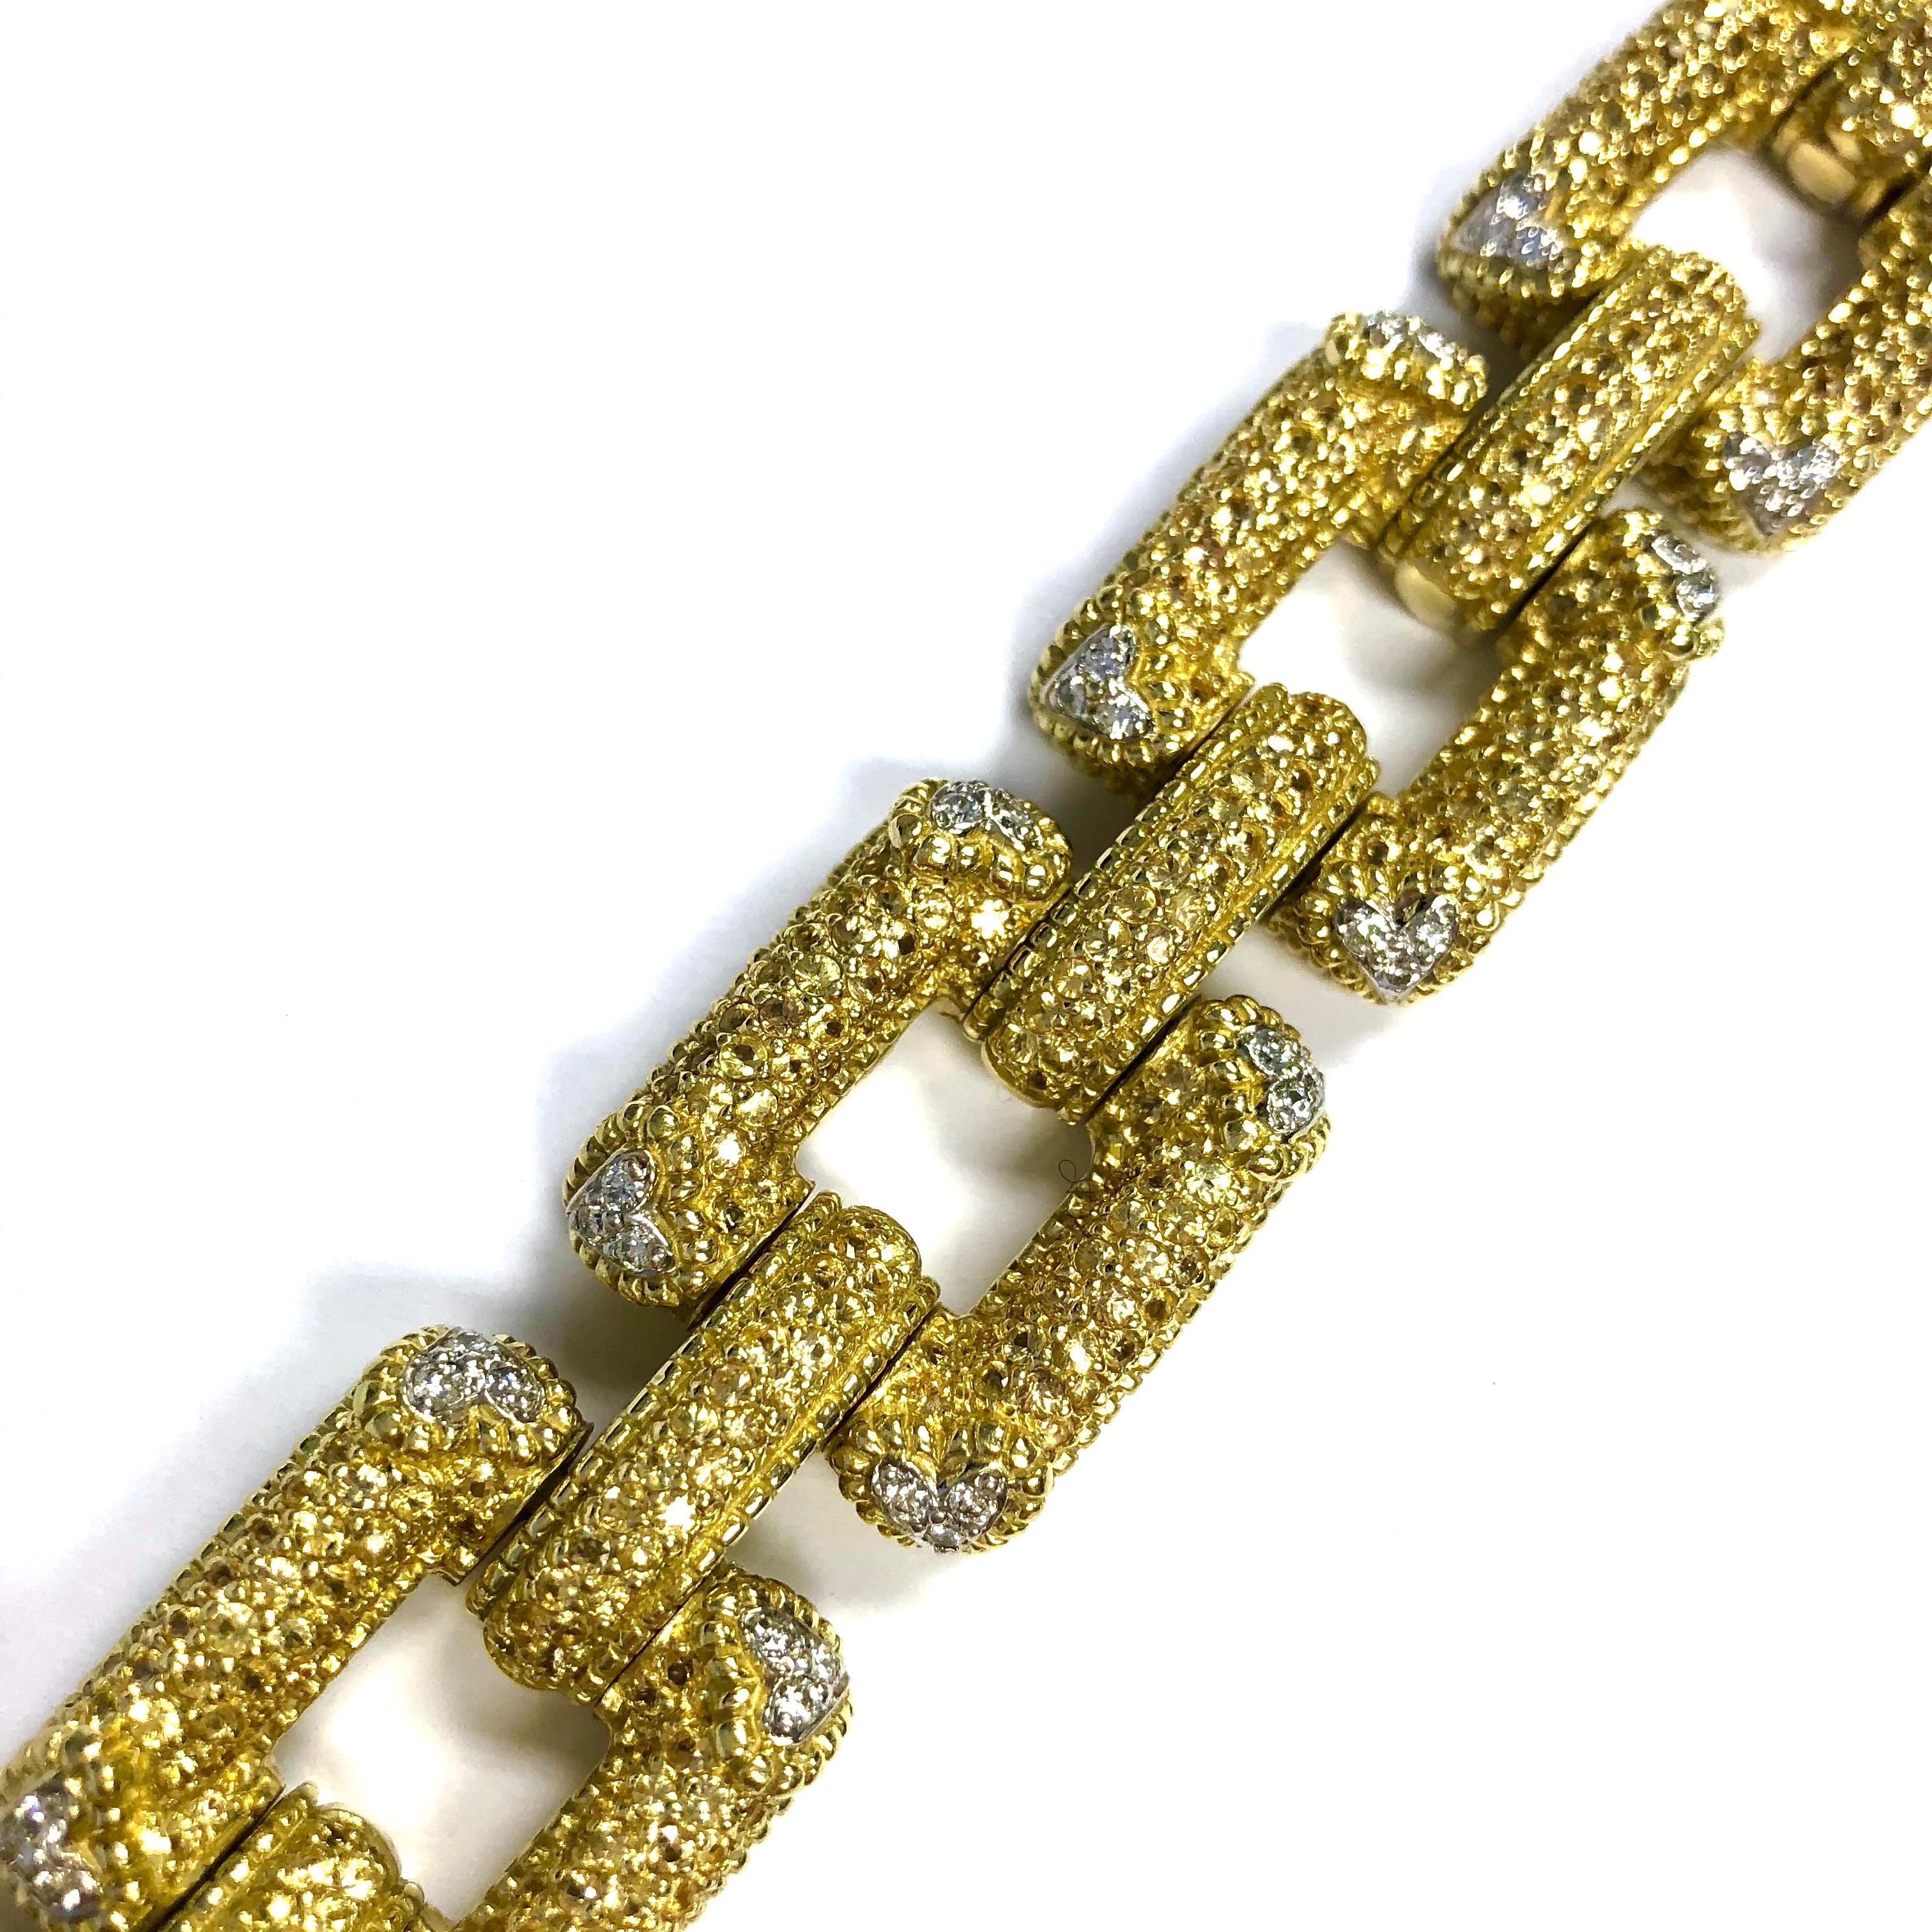 Crafted in 18K yellow gold, this magnificent bracelet is fully pave set on the front with approximately 10 carats of round cut natural yellow sapphires and 1.75 carats of round brilliant cut diamonds. Diamond Color: F-G, Clarity: